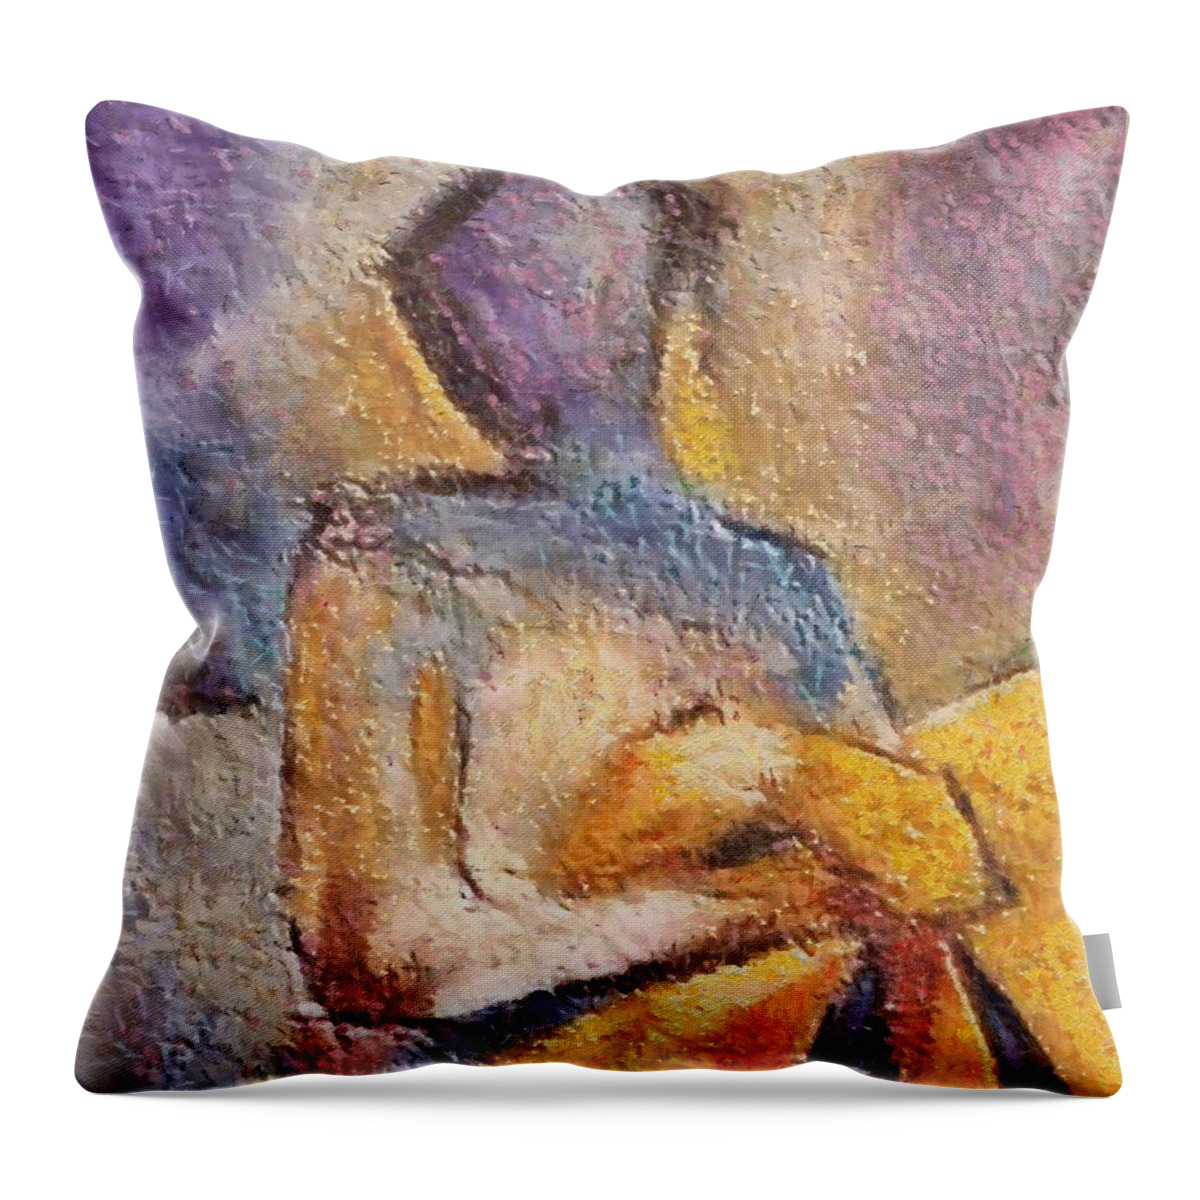 Women Throw Pillow featuring the mixed media Waiting by Dragica Micki Fortuna